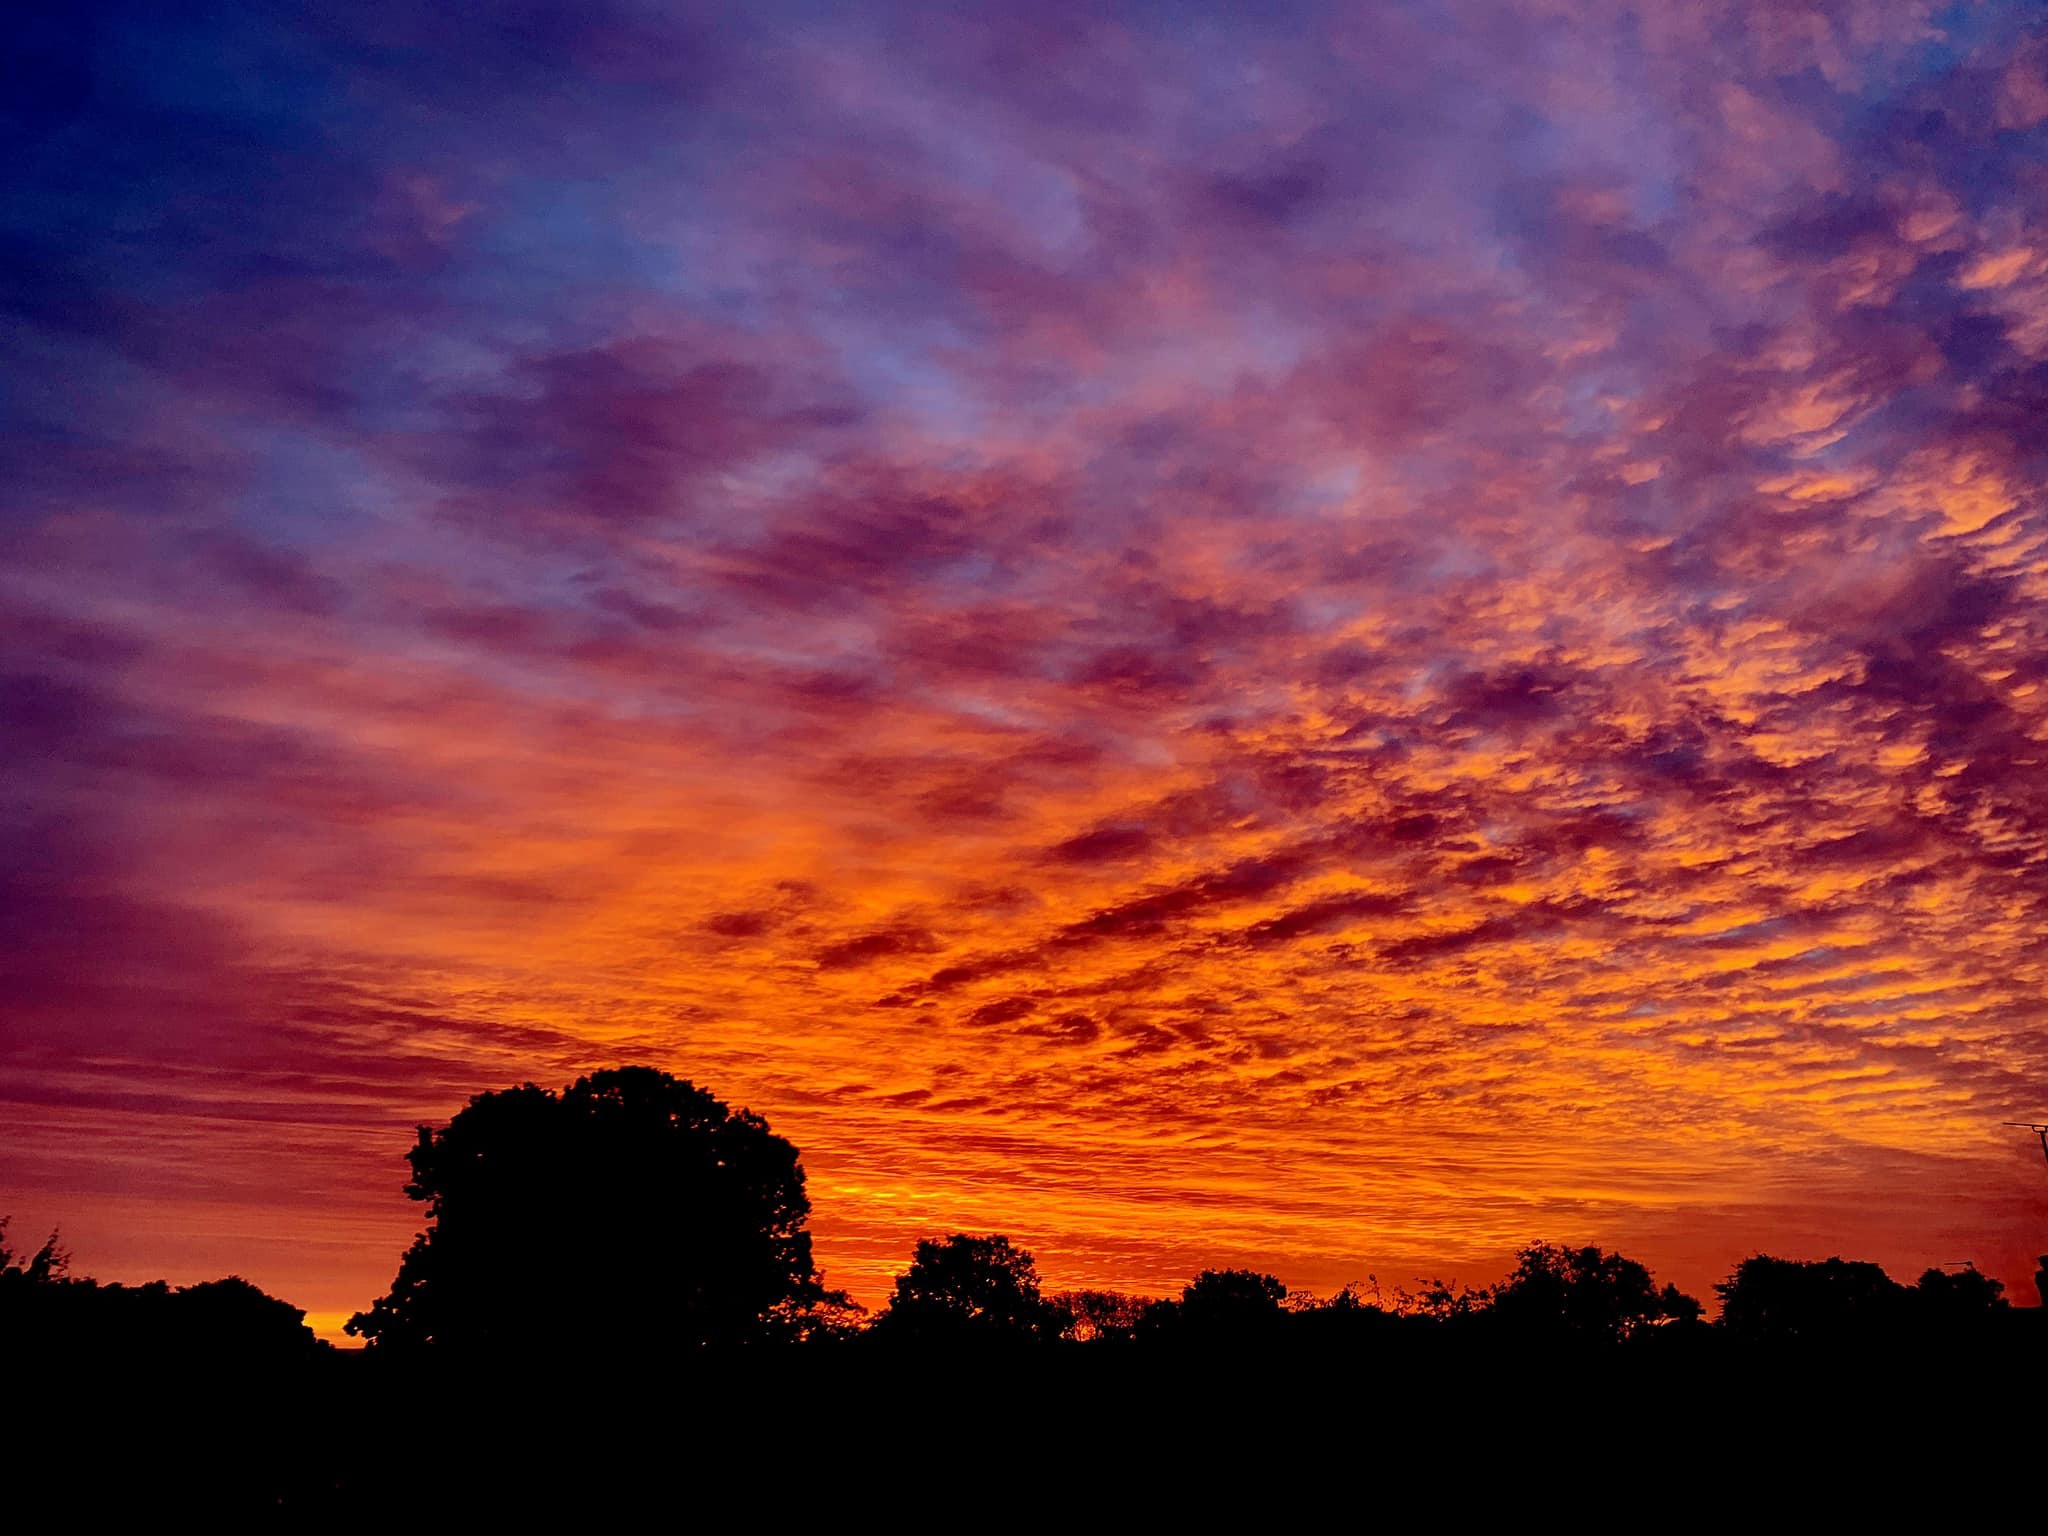 Stunning sunrise over Knutsford by Carly Jo Curbishley